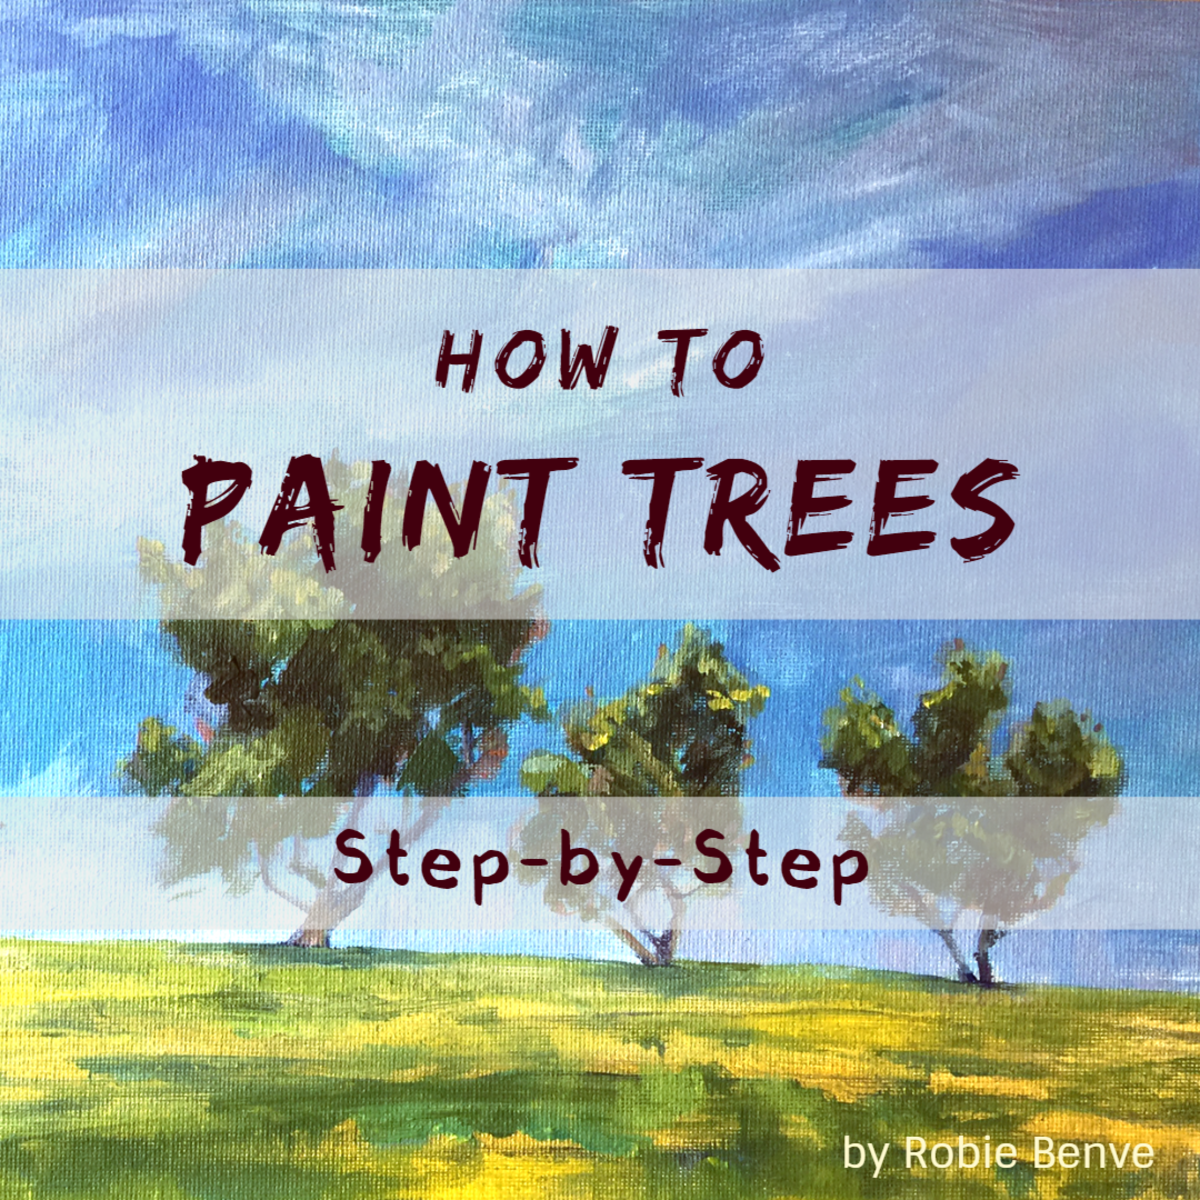 Learn the 10 steps to painting trees, starting with the most important feature of the tree, its contour, and ending with the details. Robie Benve shares her 10 secrets to painting trees that are believable and that present character and dimension.